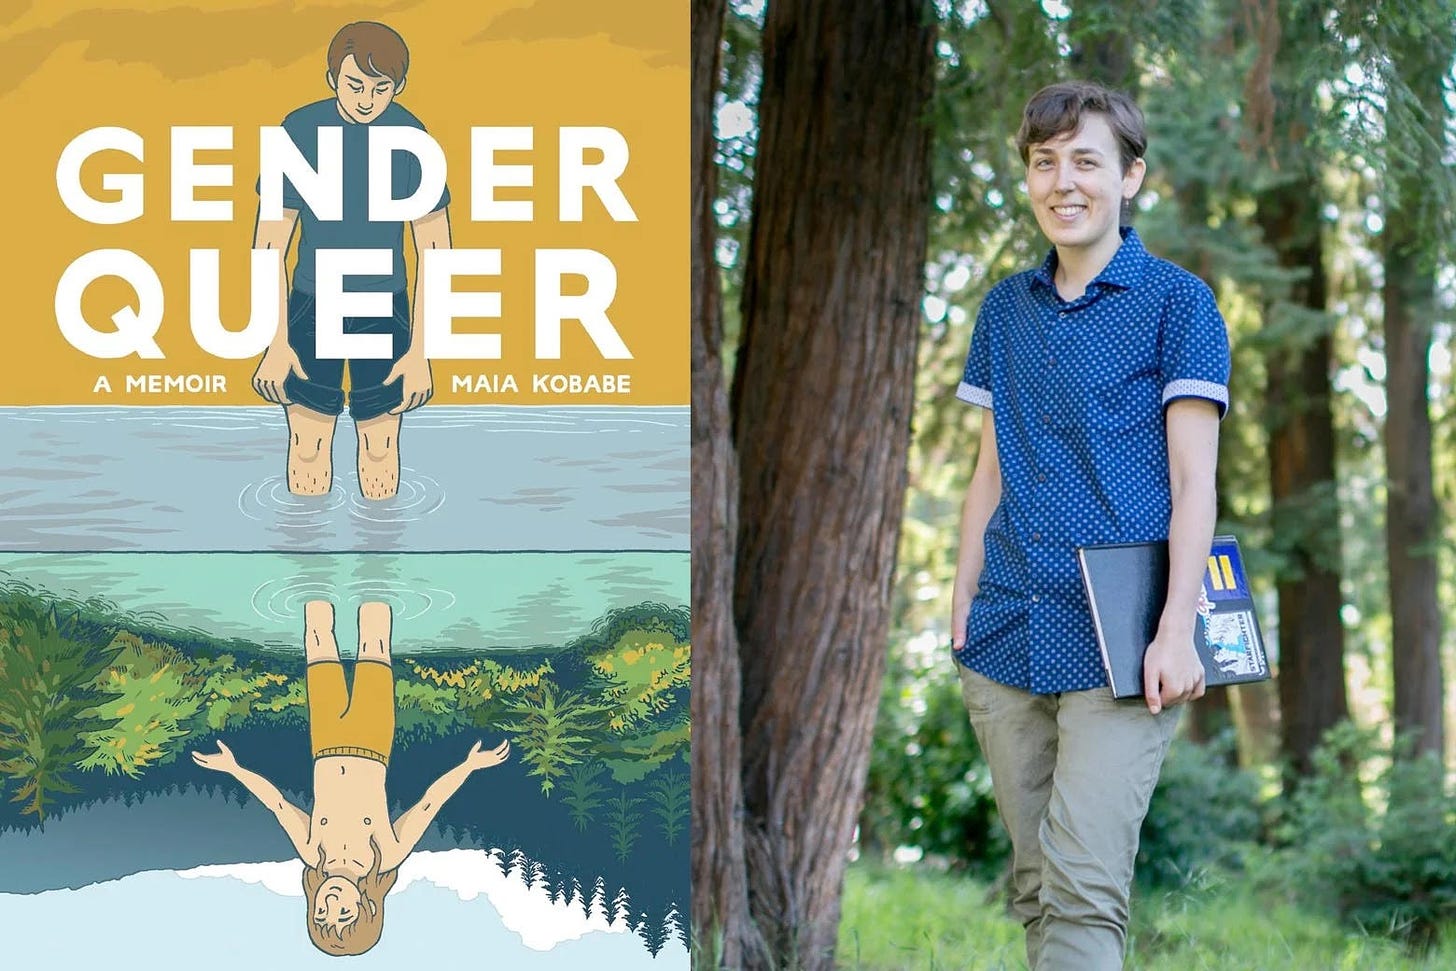 Two photos side by side with the left photo the book cover with two drawings of a person mirroring one another and text reading "Gender Queer, a memoir, Maia Kobabe". The right photo is of Maia Kobabe, the author. They have short brown hair and are wearing a short-sleeved button up that is navy blue with small polka dots, dusty green khakis and a background of trees. 